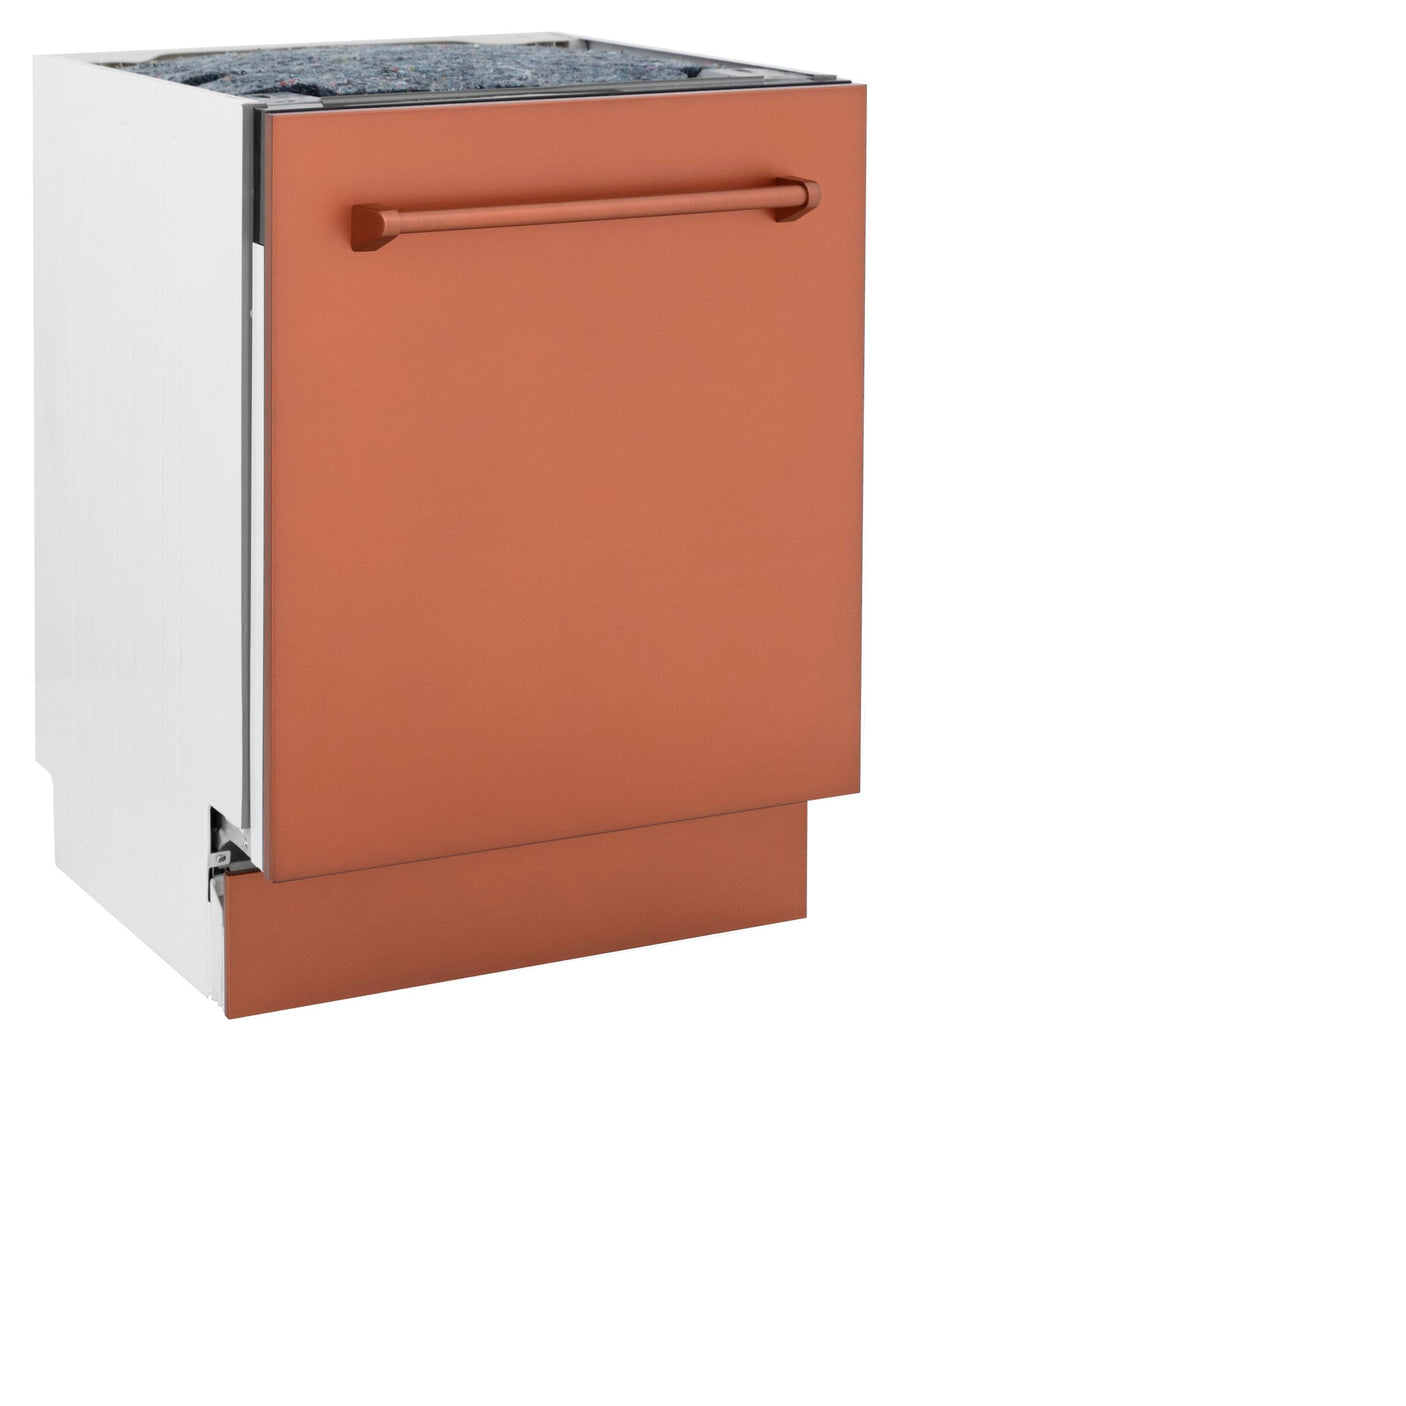 ZLINE 24" Tallac Series 3rd Rack Dishwasher with Traditional Handle, 51dBa (DWV-24) [Color: Copper]